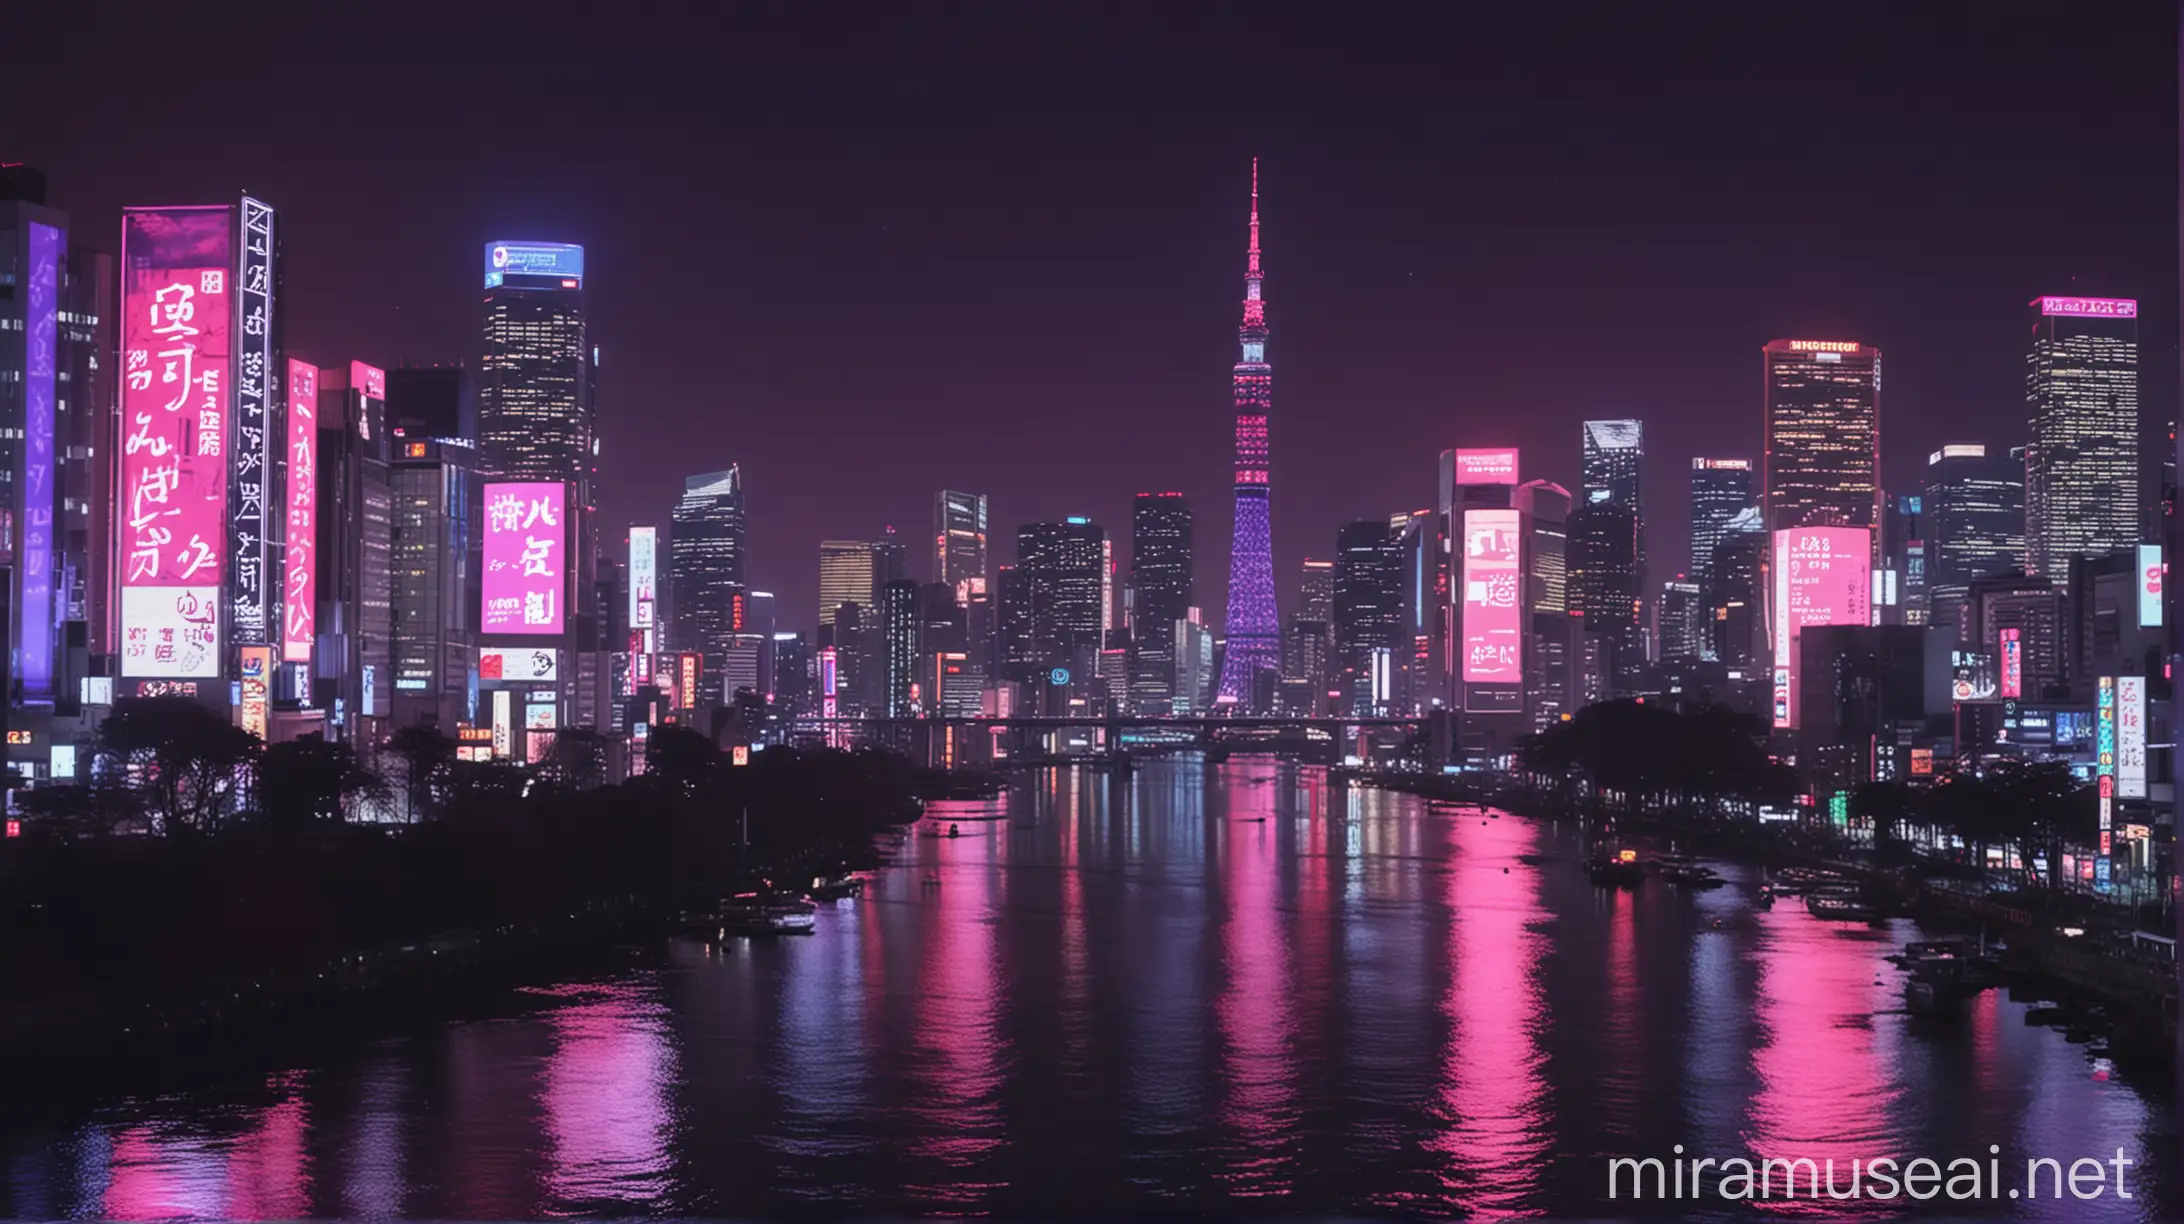 Panoramic Night View of Tokyo with Neon Lights and PurplePink Colors